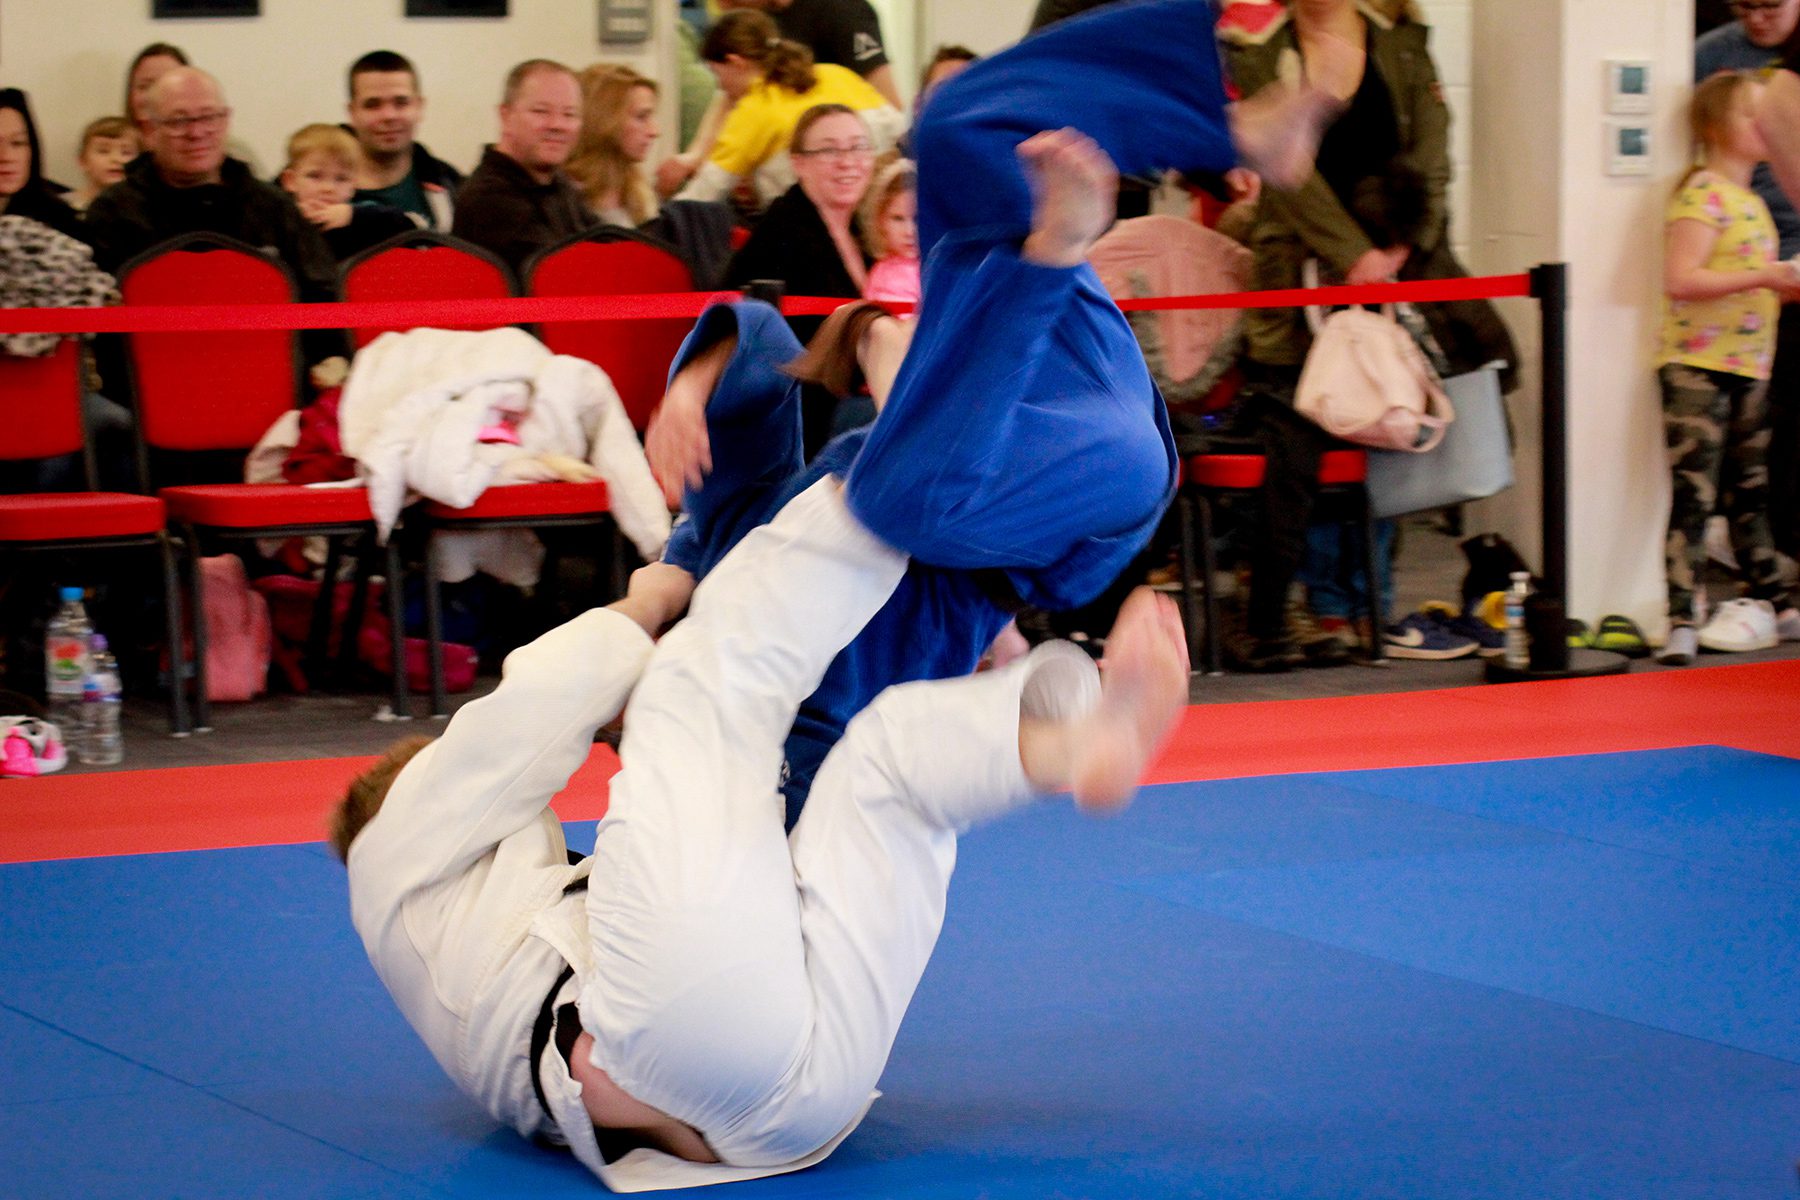 Photo of adults judo class with spectators